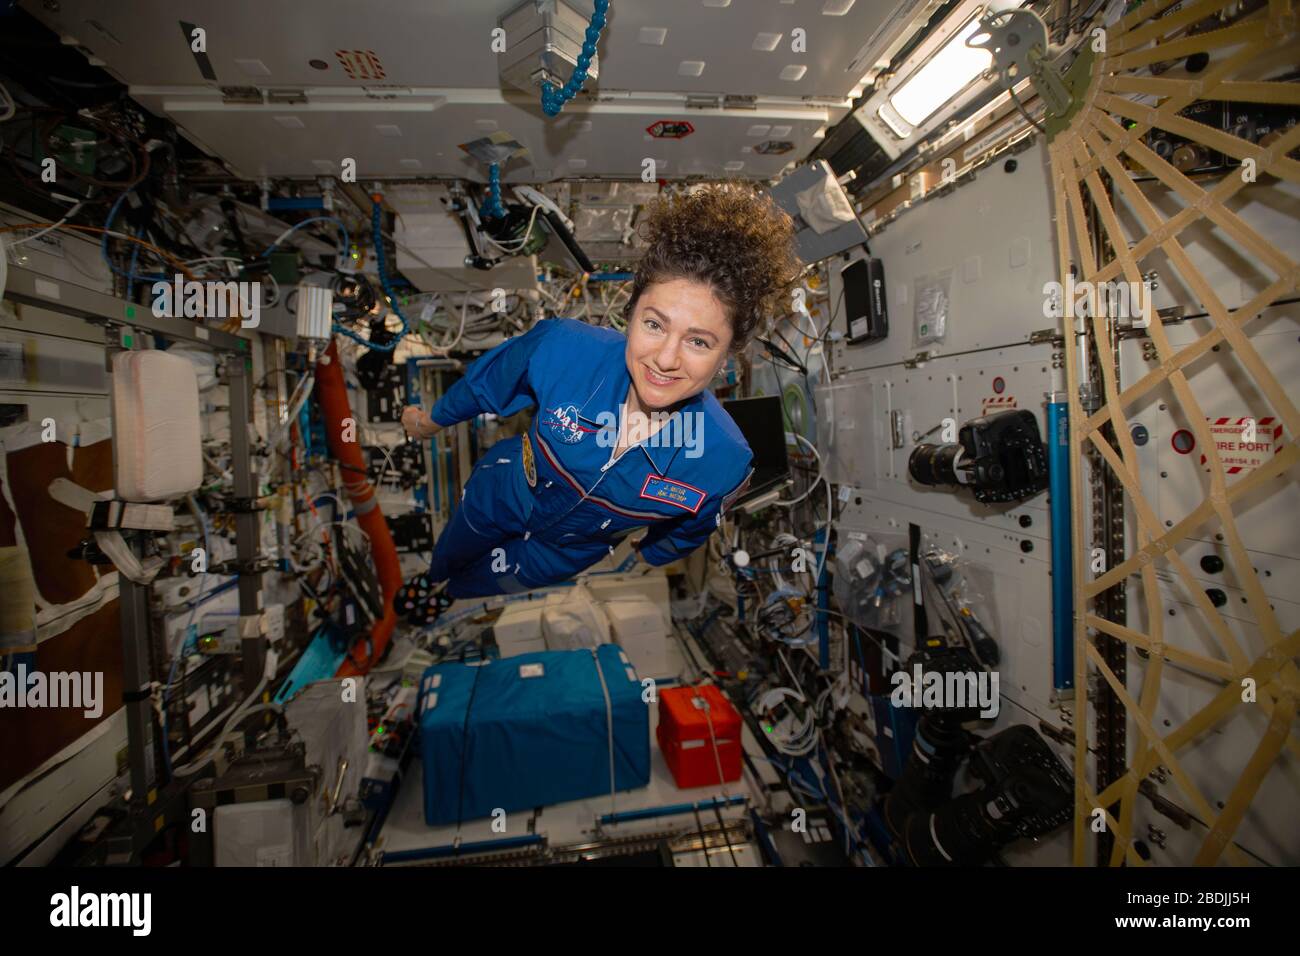 ISS - 29 March 2020 - NASA astronaut and Expedition 62 Flight Engineer Jessica Meir hovers for a portrait in the weightless environment of the Interna Stock Photo